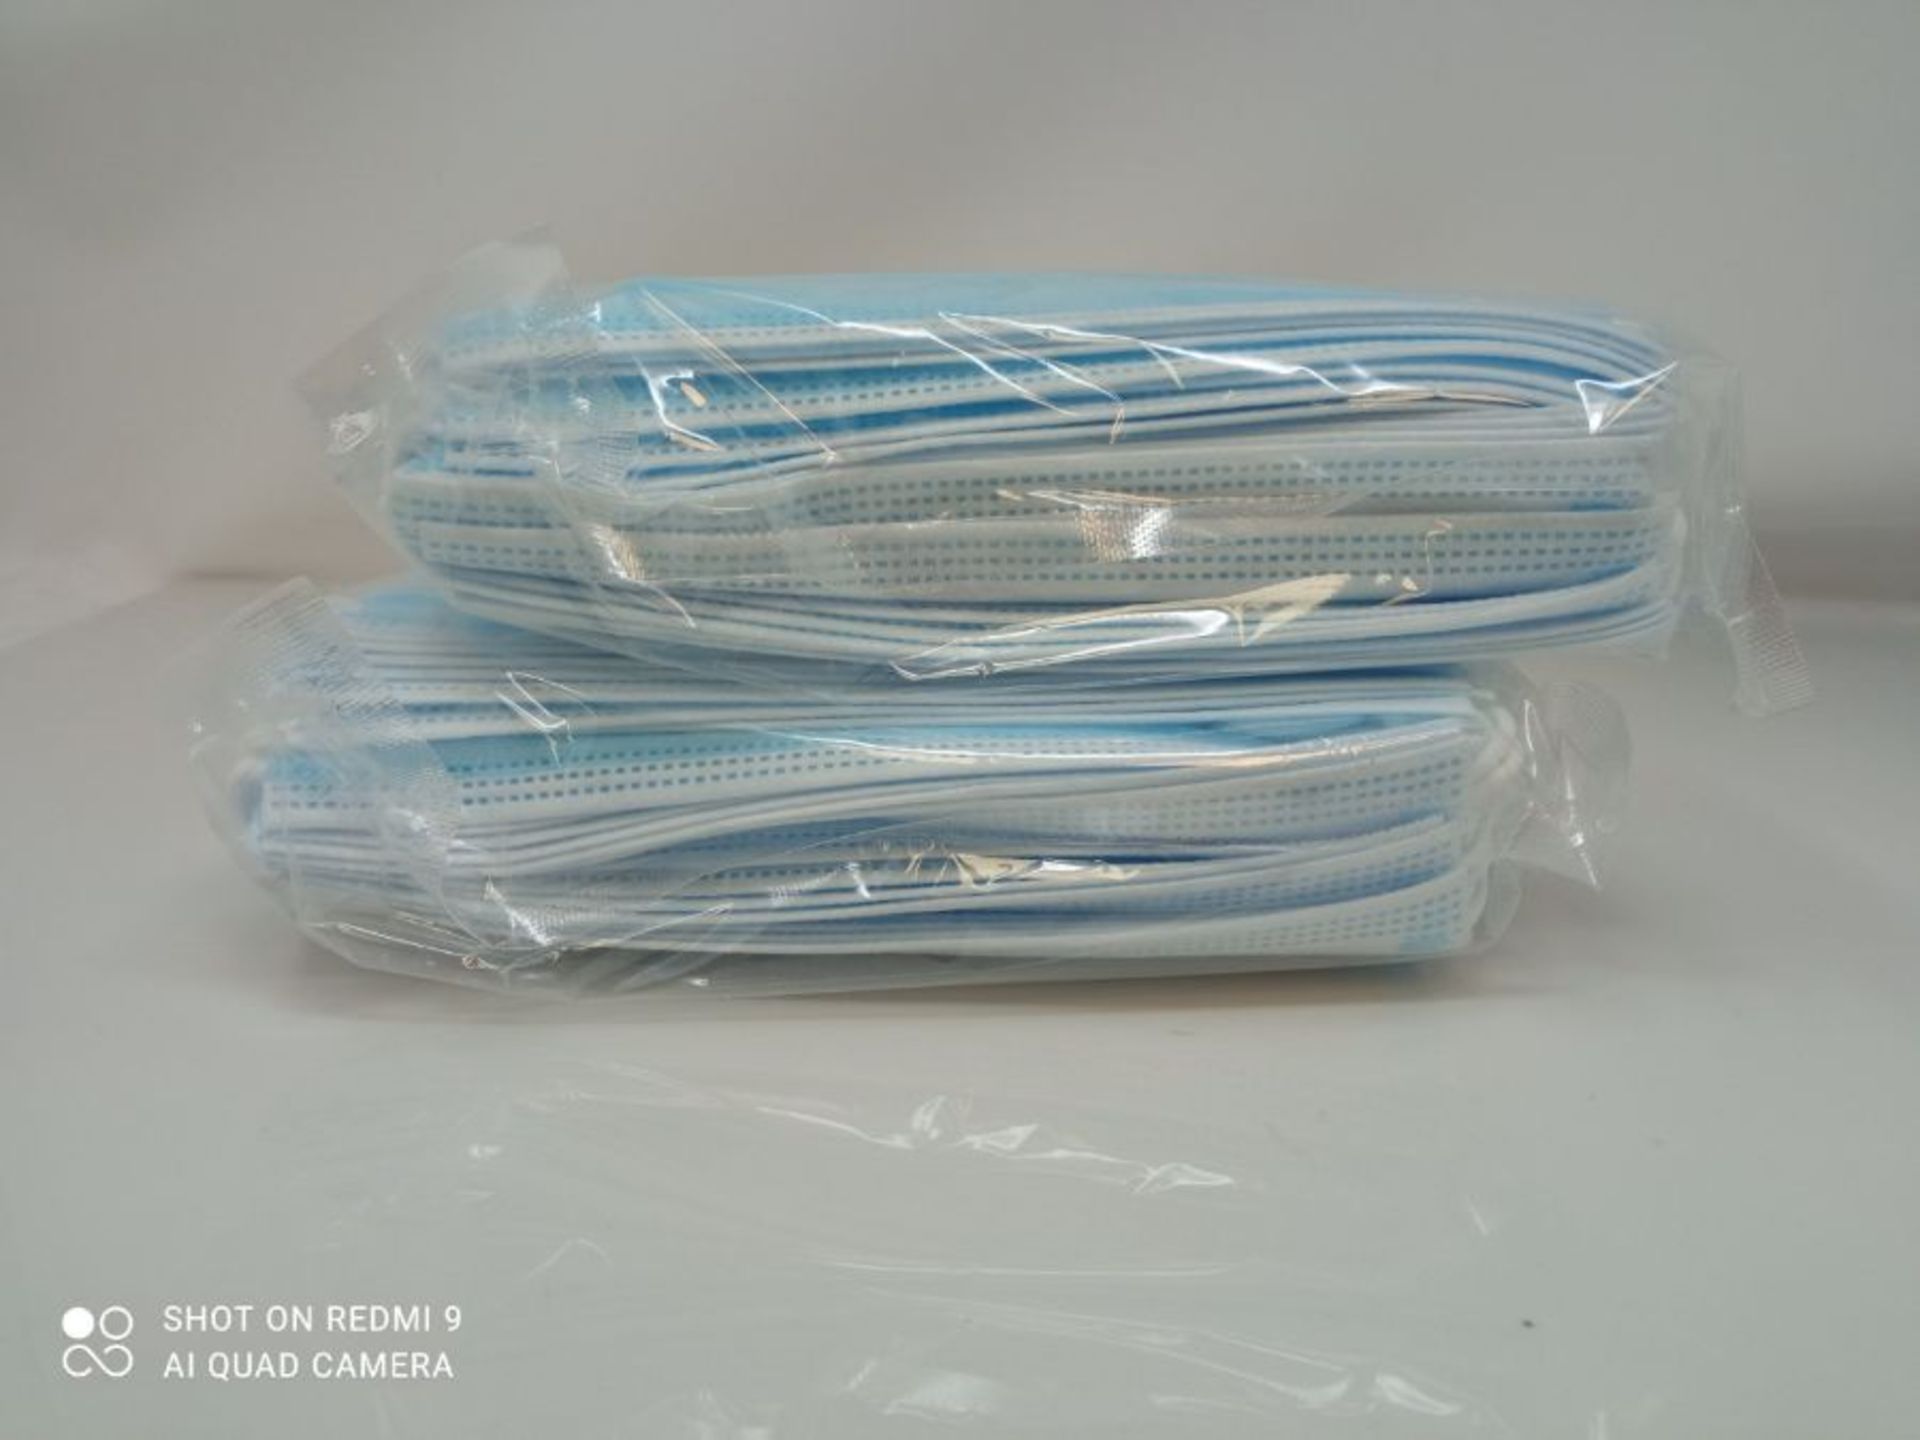 creek medical CE Approved and Tested 3-Layer Medical Surgical Mask Type I, Non-Sterile - Image 2 of 2